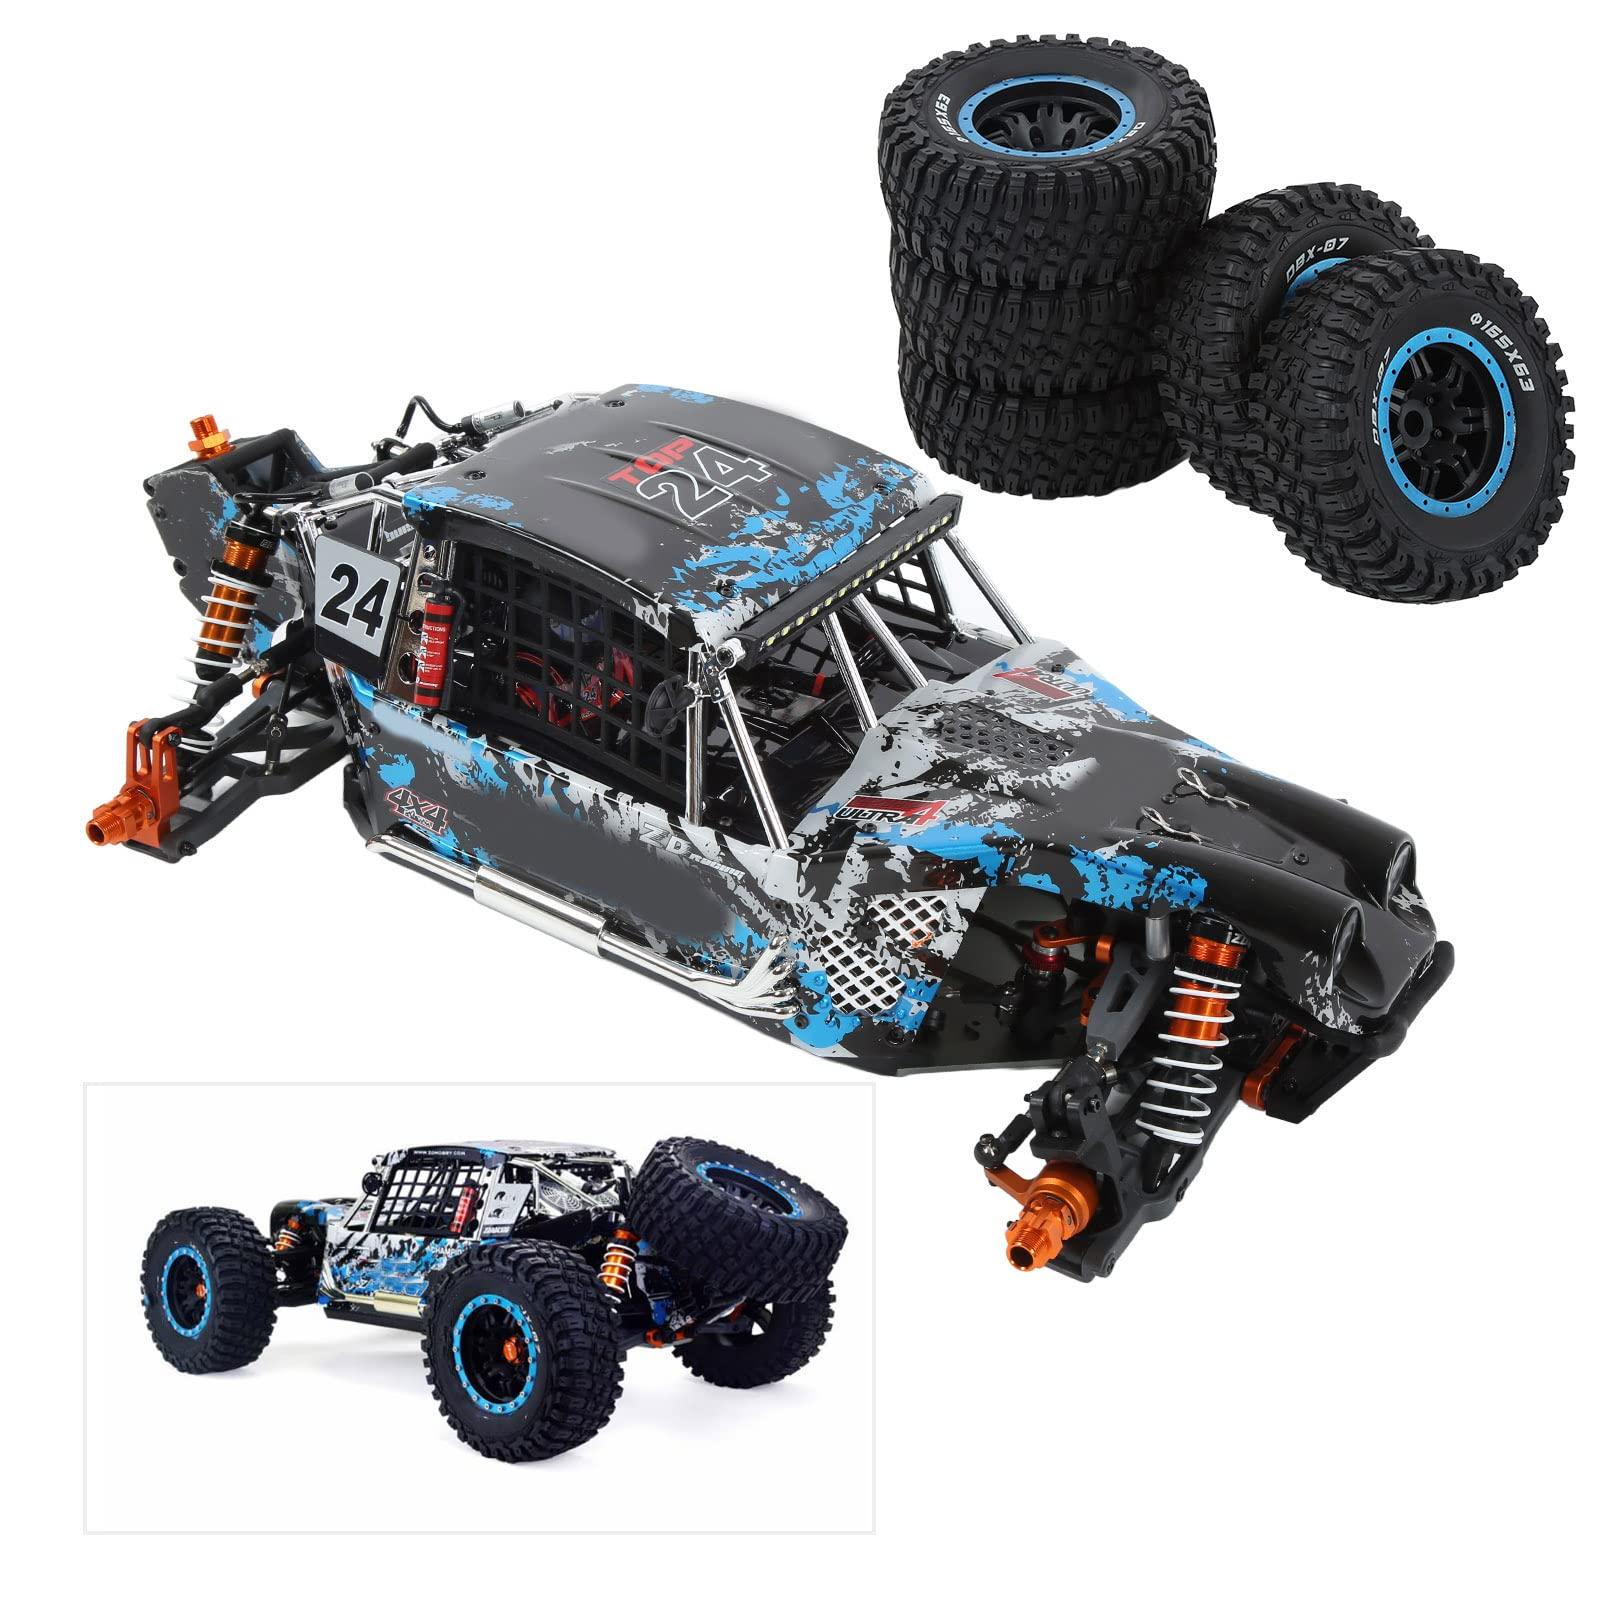 1/7 Rc Body: 1/7 RC Body: The Perfect Choice for Off-Road RC Adventures